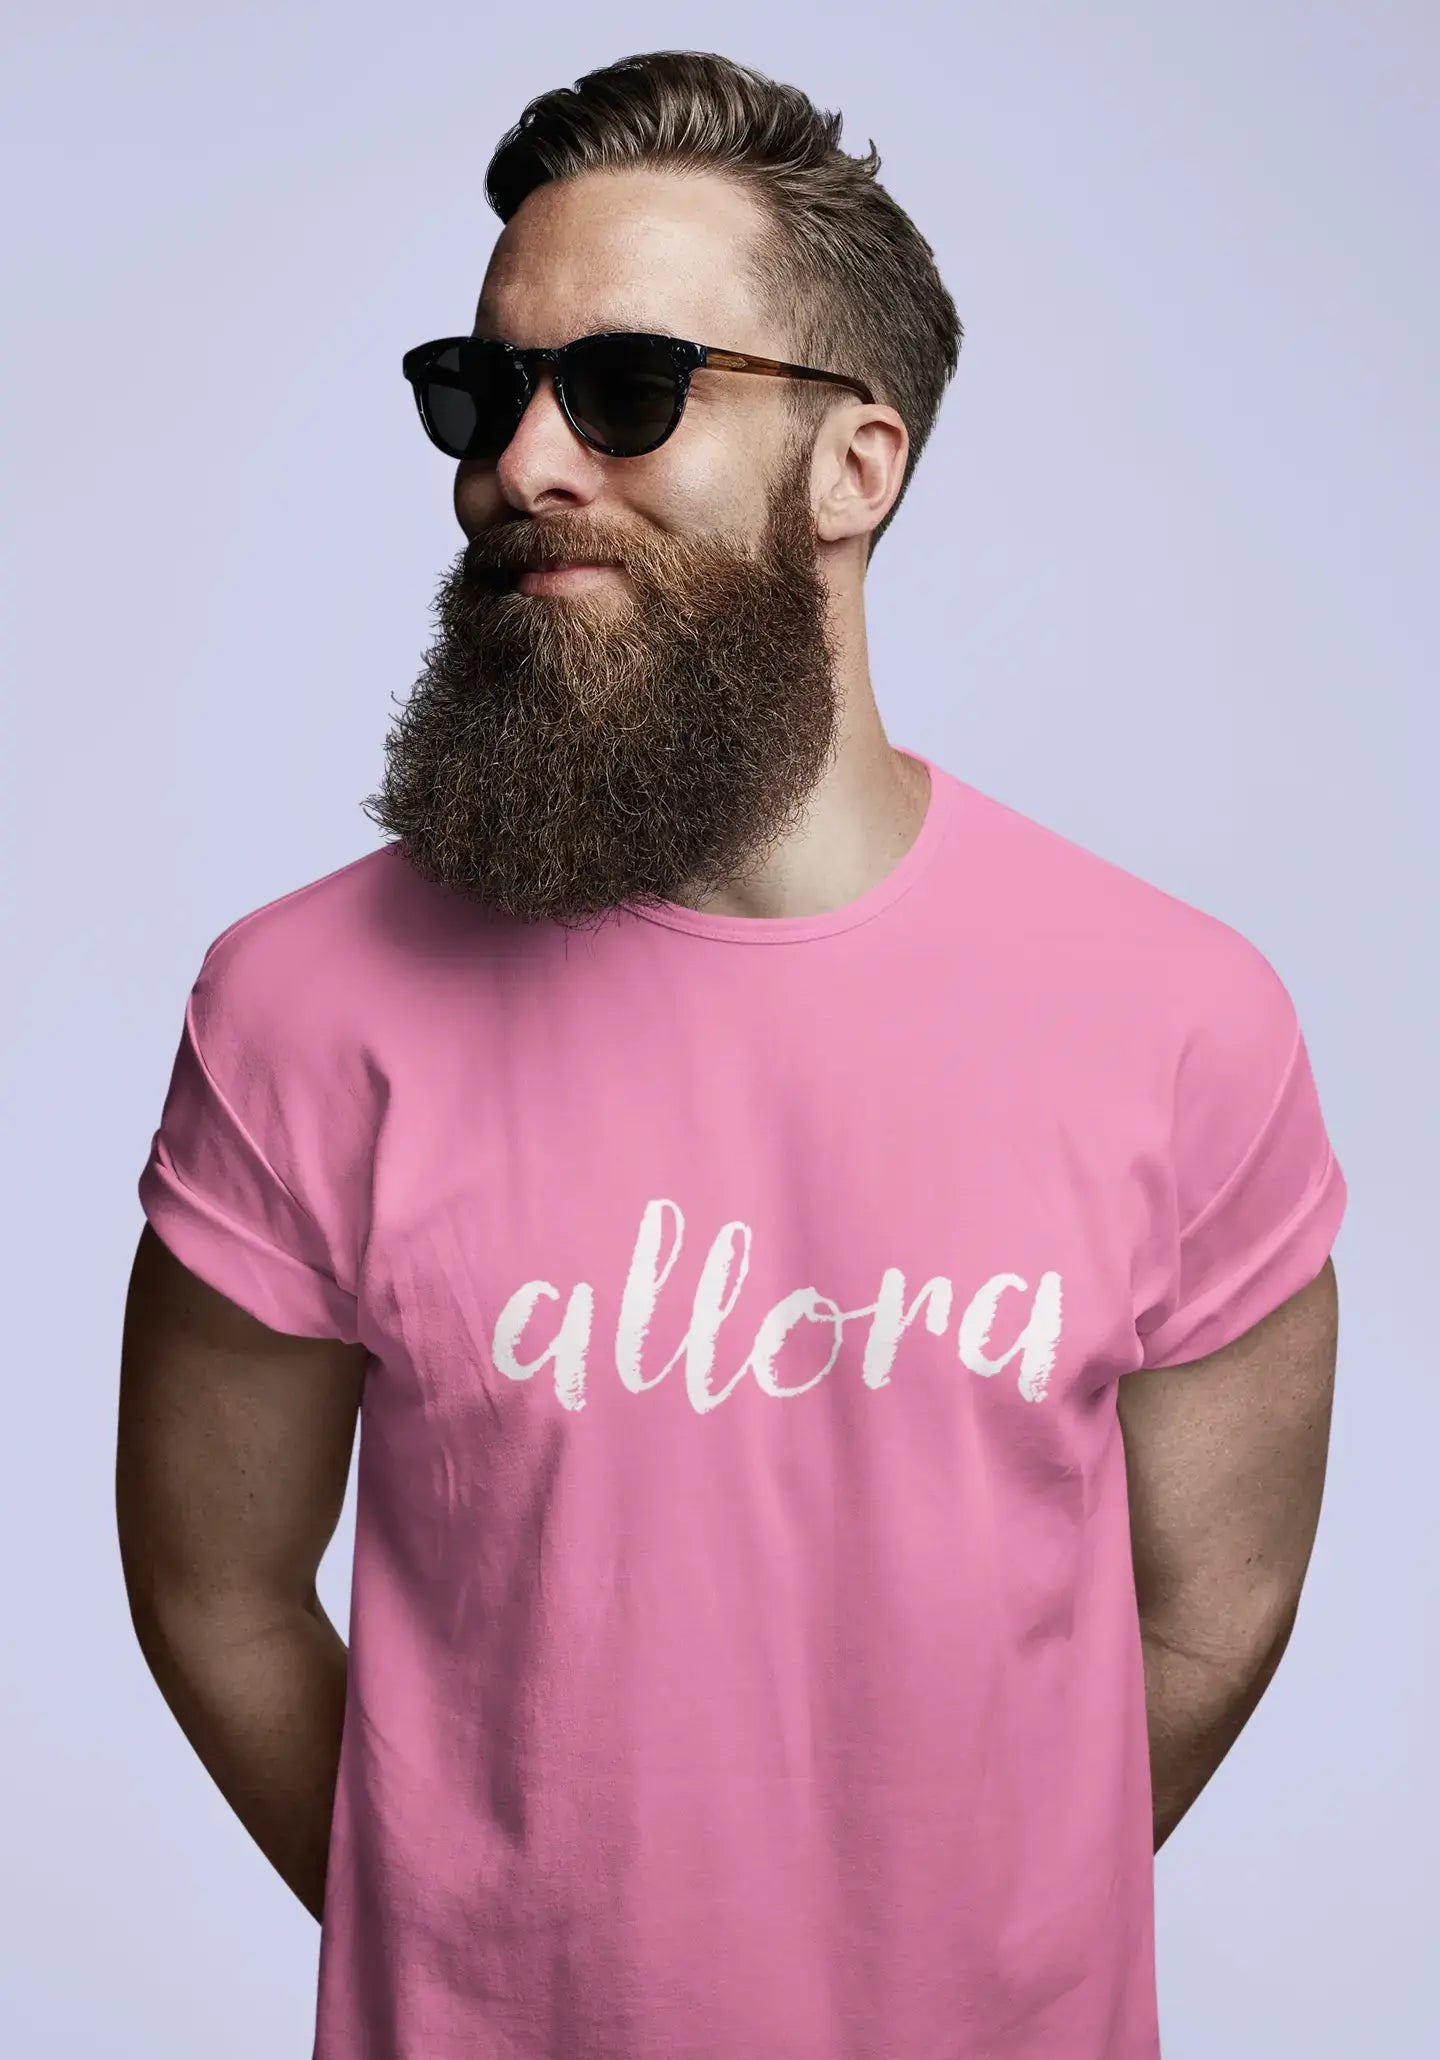 ULTRABASIC - Graphic Printed Men's Allora T-Shirt Orchid Pink